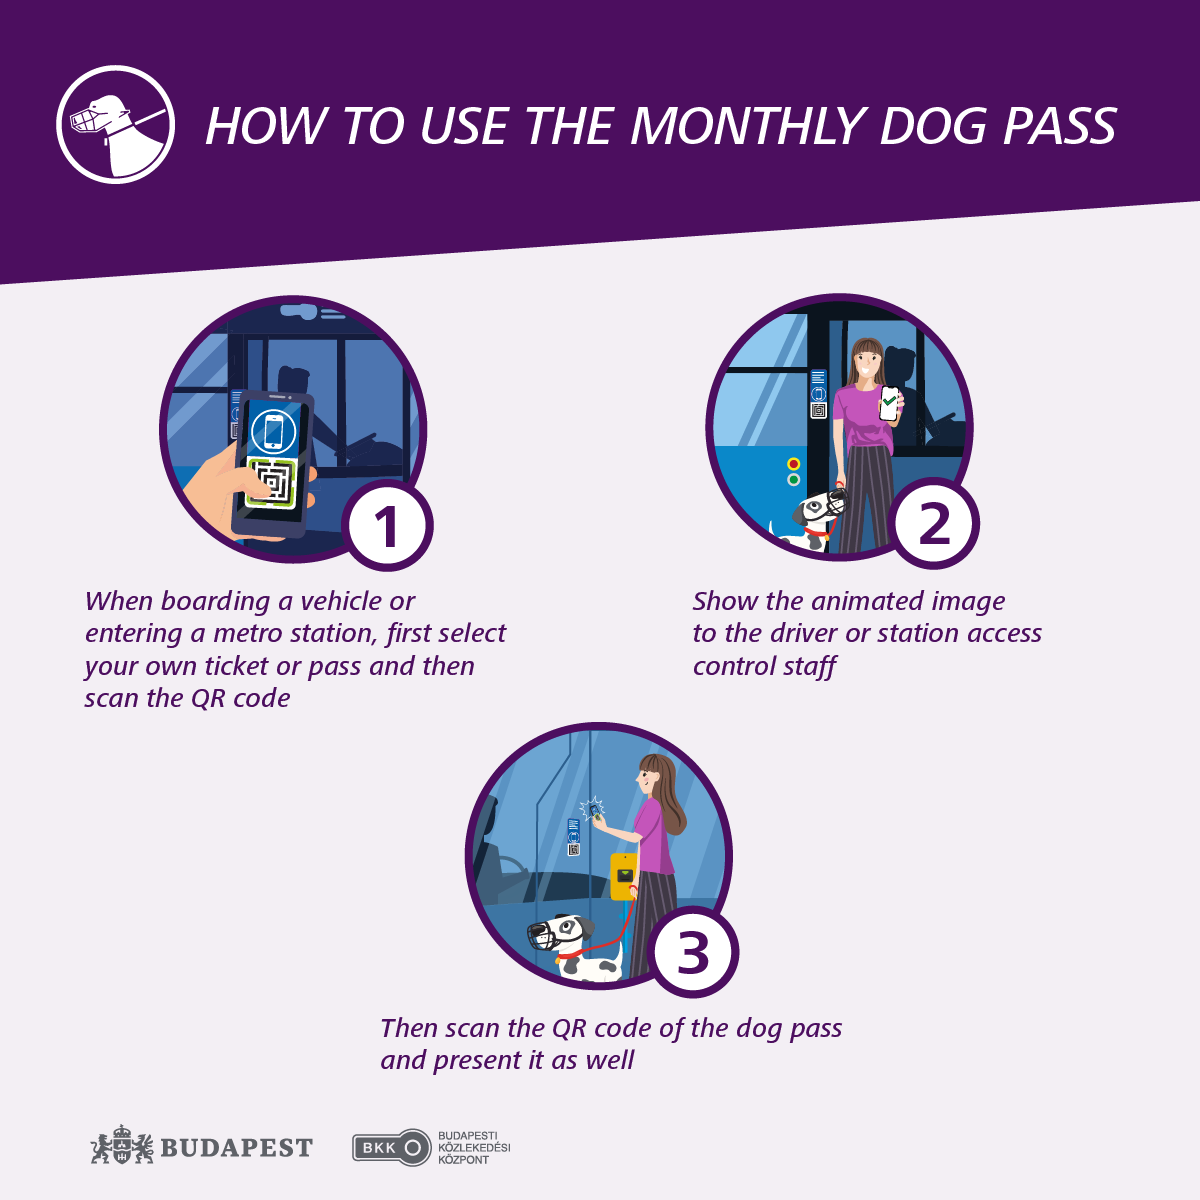 How to use monthly dog pass